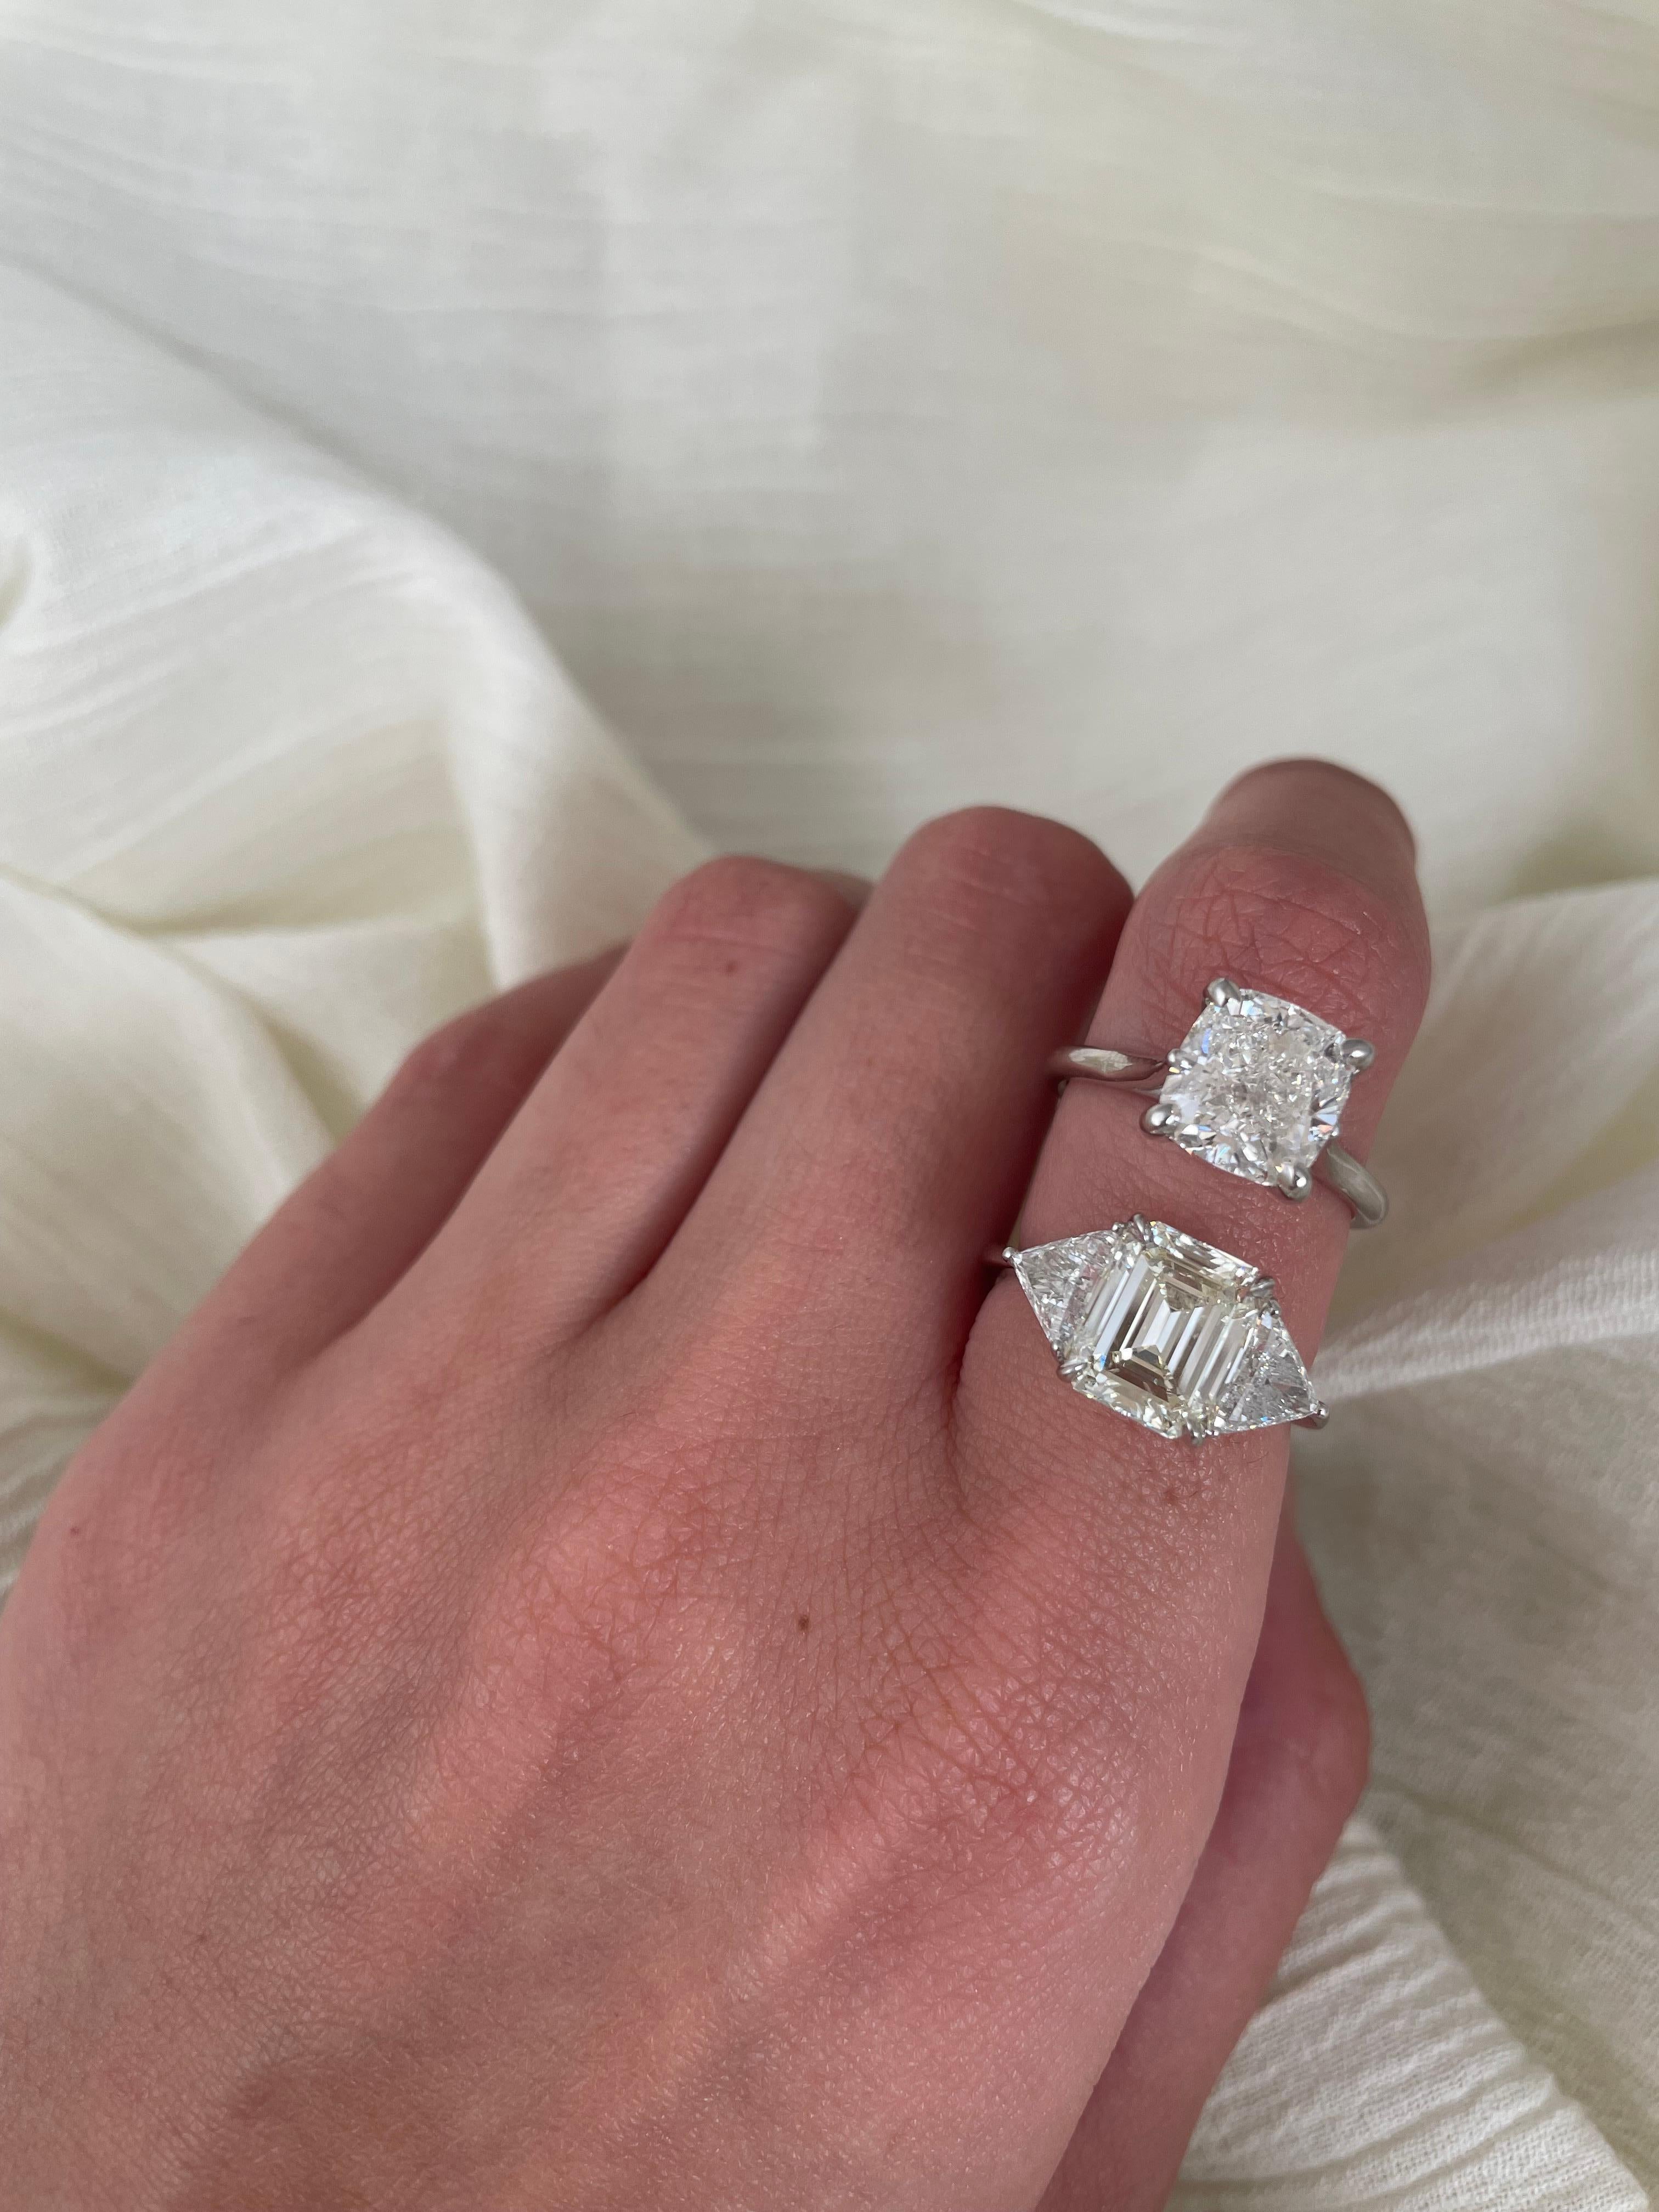 Stunning and classic three-stone diamond engagement ring, EGL certified. 
High jewelry by Alexander Beverly Hills. 
Center stone, 2.85ct emerald cut diamond. L color grade, VS1 clarity grade, EGL certified. Side stones, 2 trilliant cut diamonds,